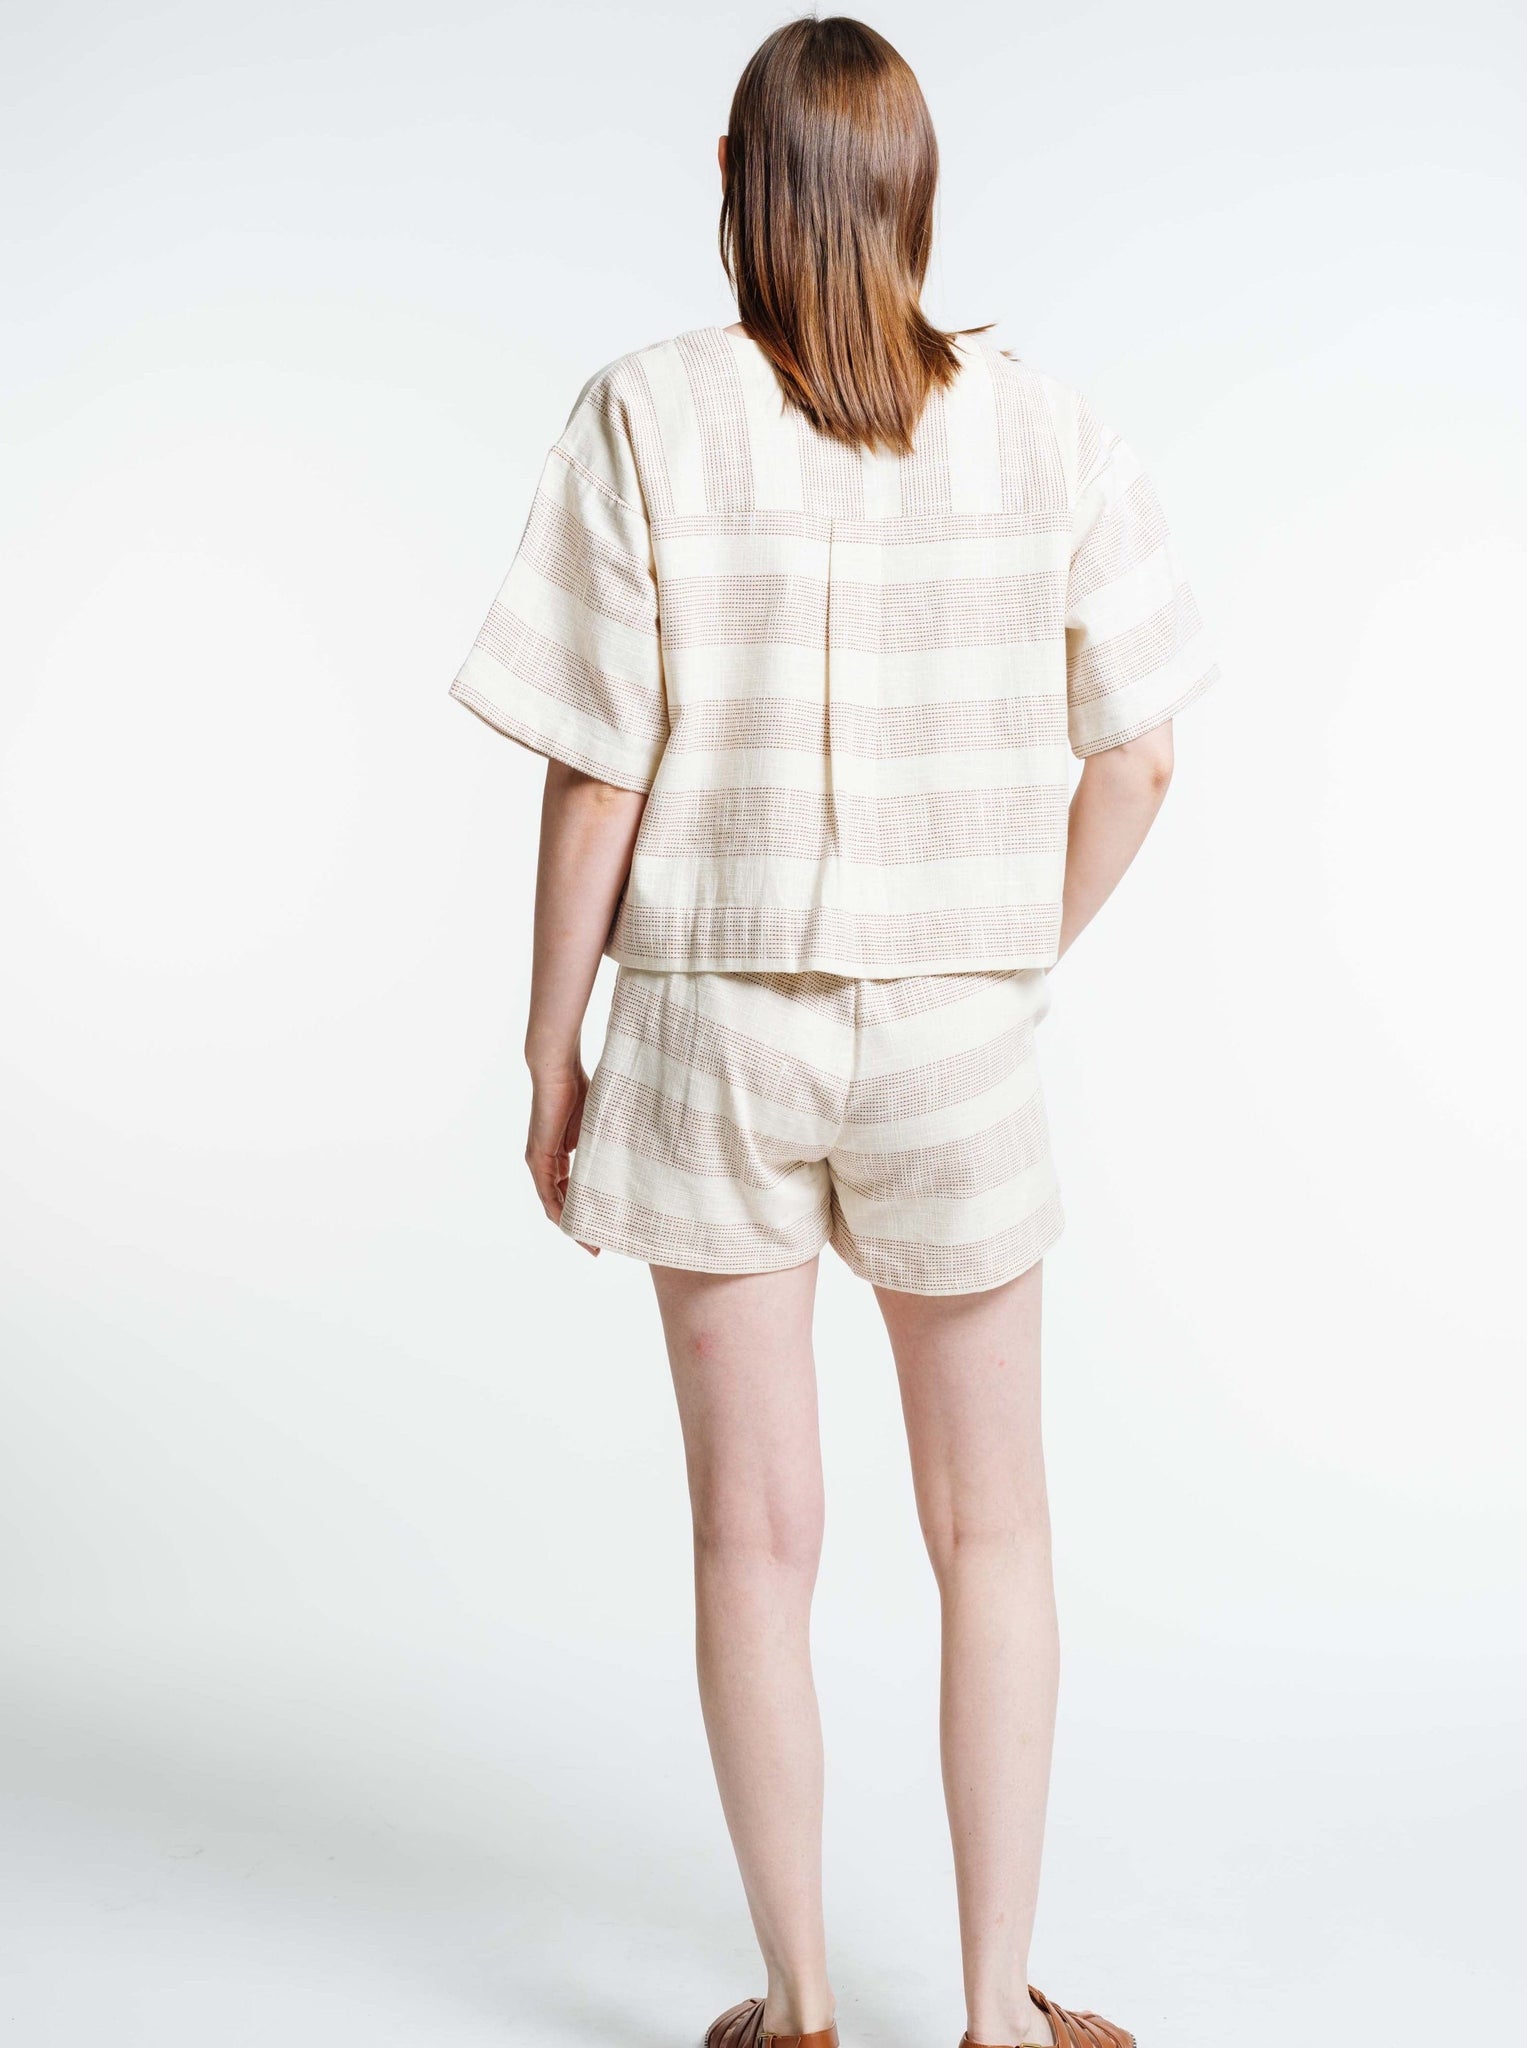 The back view of a woman wearing a Baker Top - Terracotta Ticking Stripe and shorts.